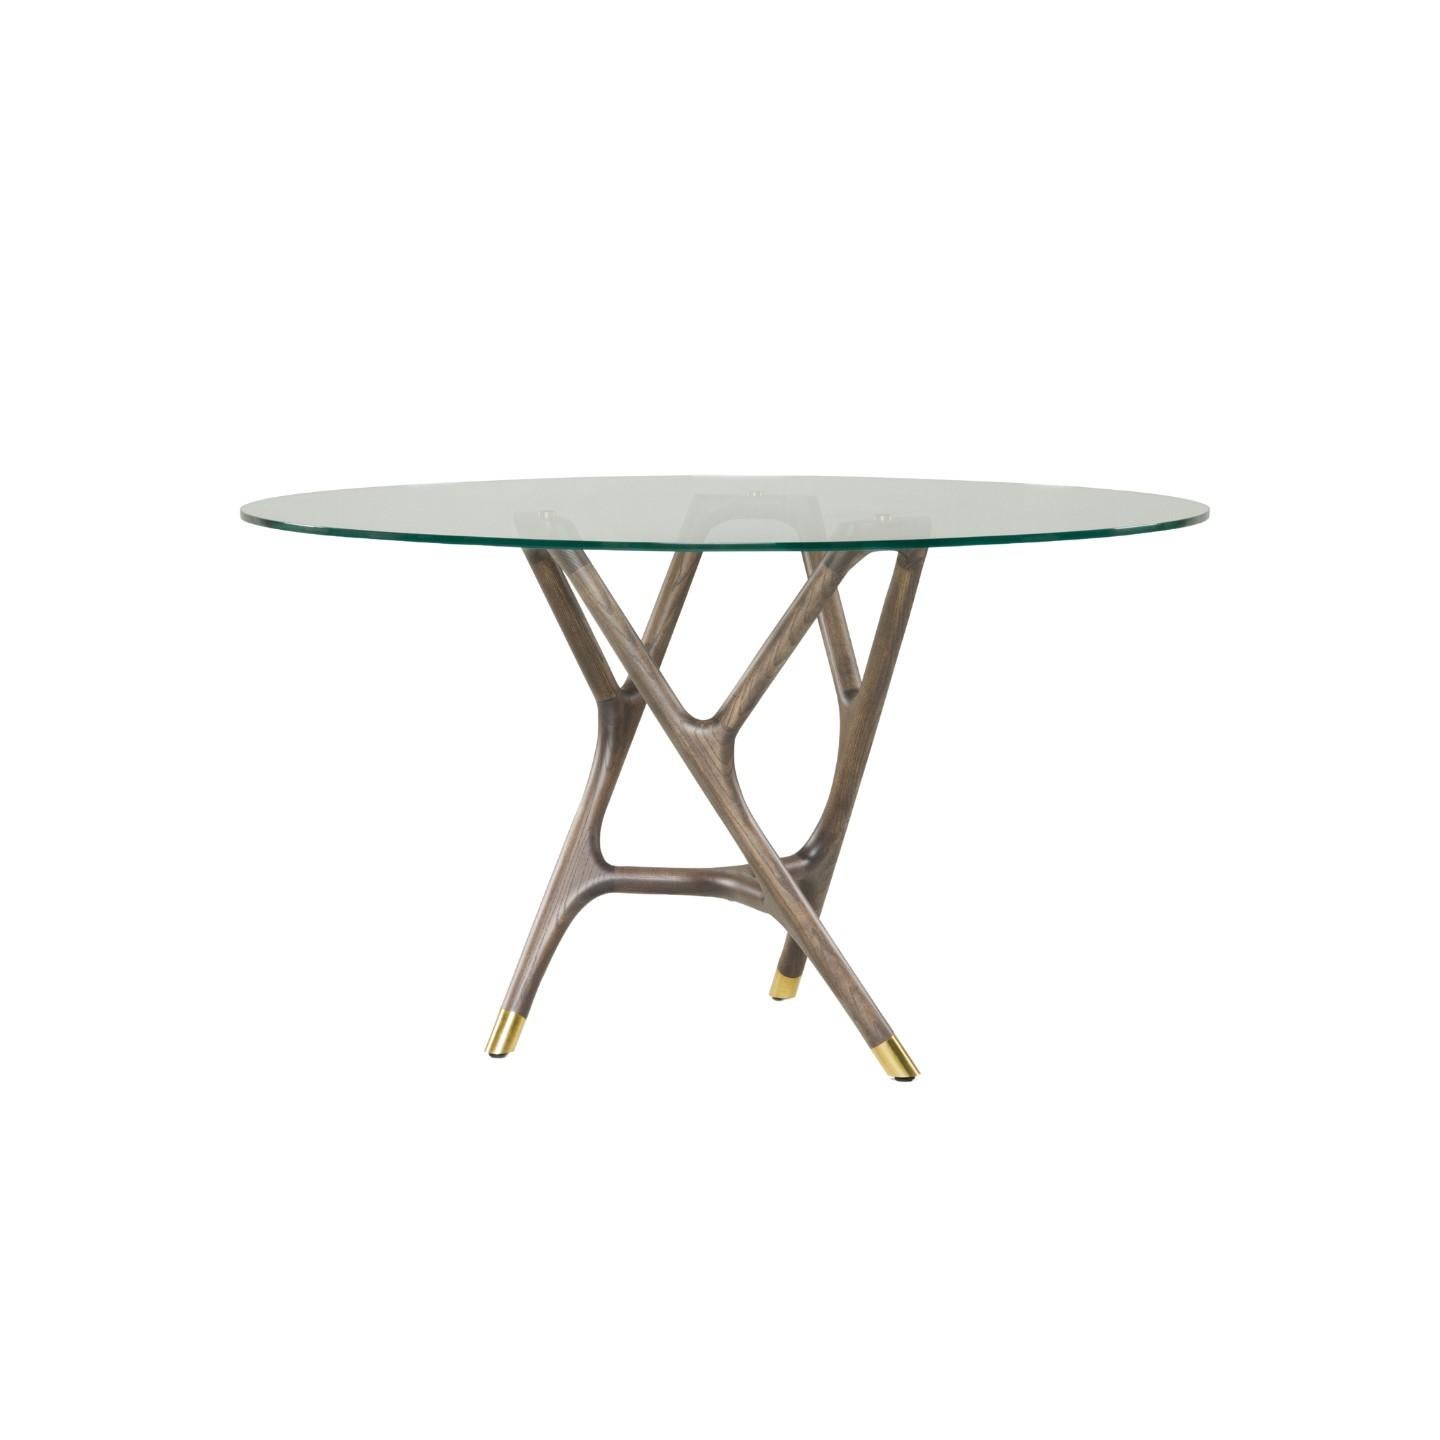 Contemporary style Joyce round dining table made of turned ashwood with glass top and brass tips.
Designed by Libero Rutilo
available in diam. 140cm
 